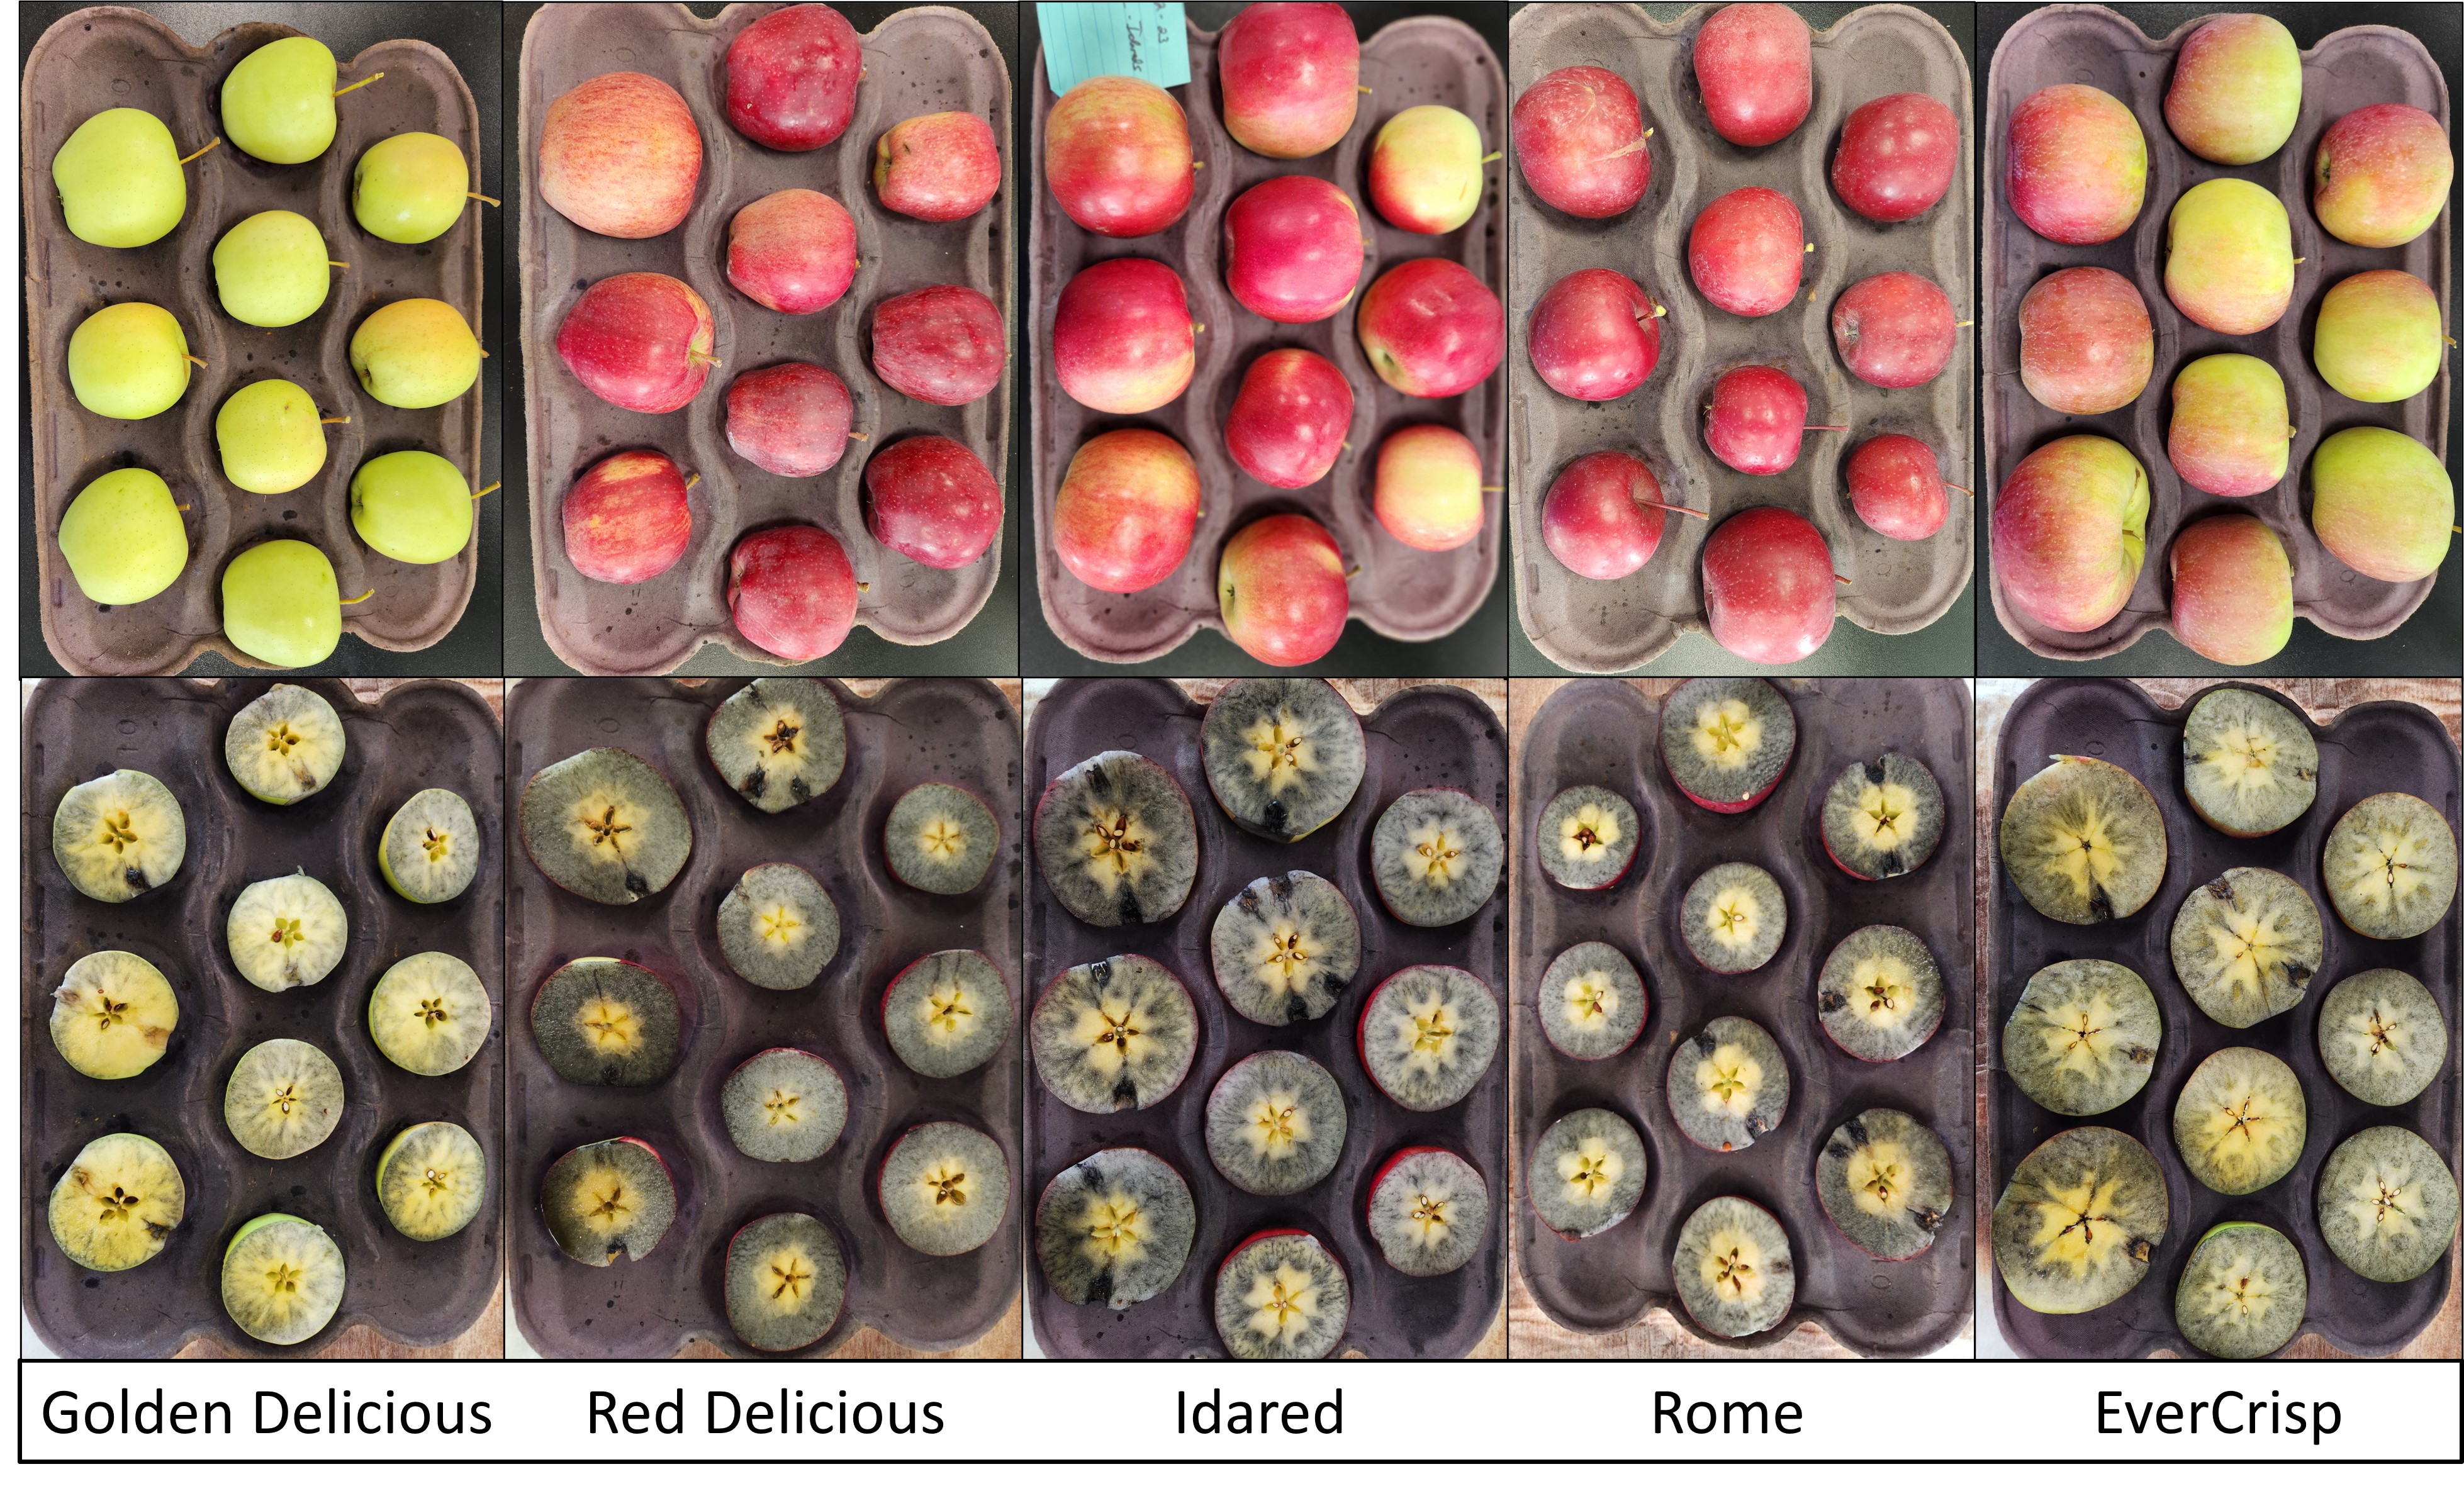 Apples sliced in half for starch testing